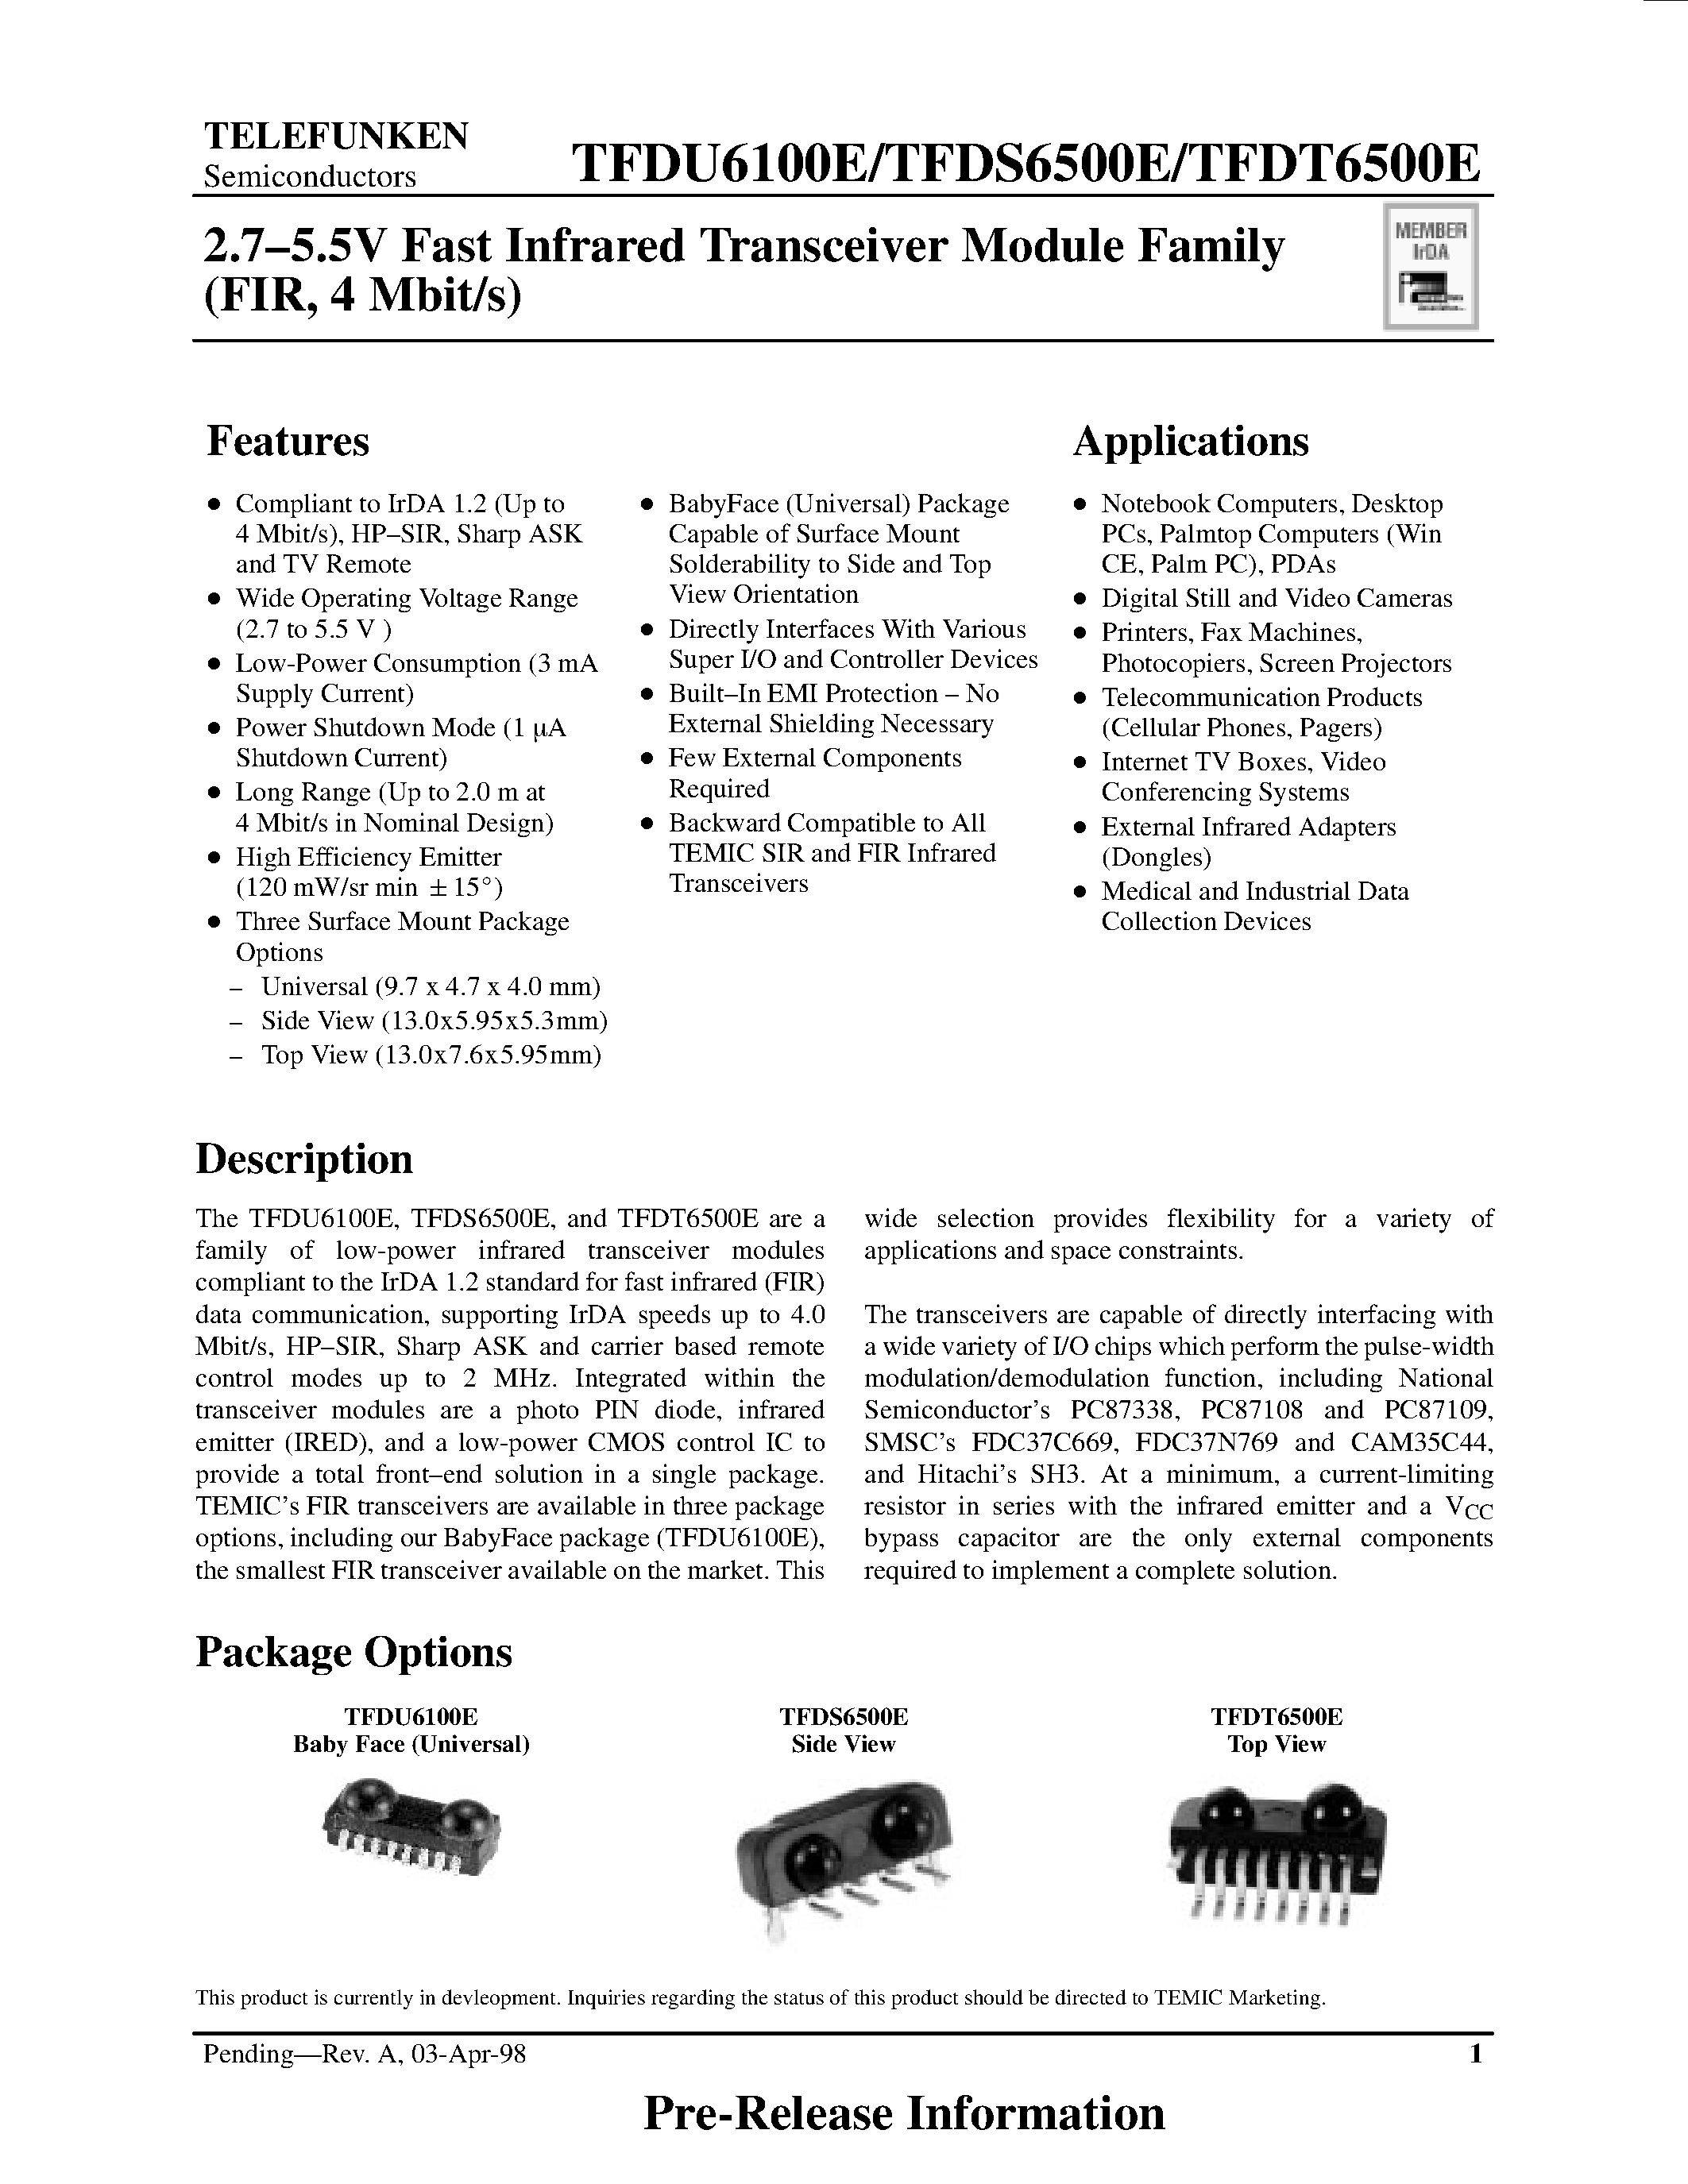 Datasheet TFDS6500E - 2.7-5.5V Fast Infrared Transceiver Module Family page 1